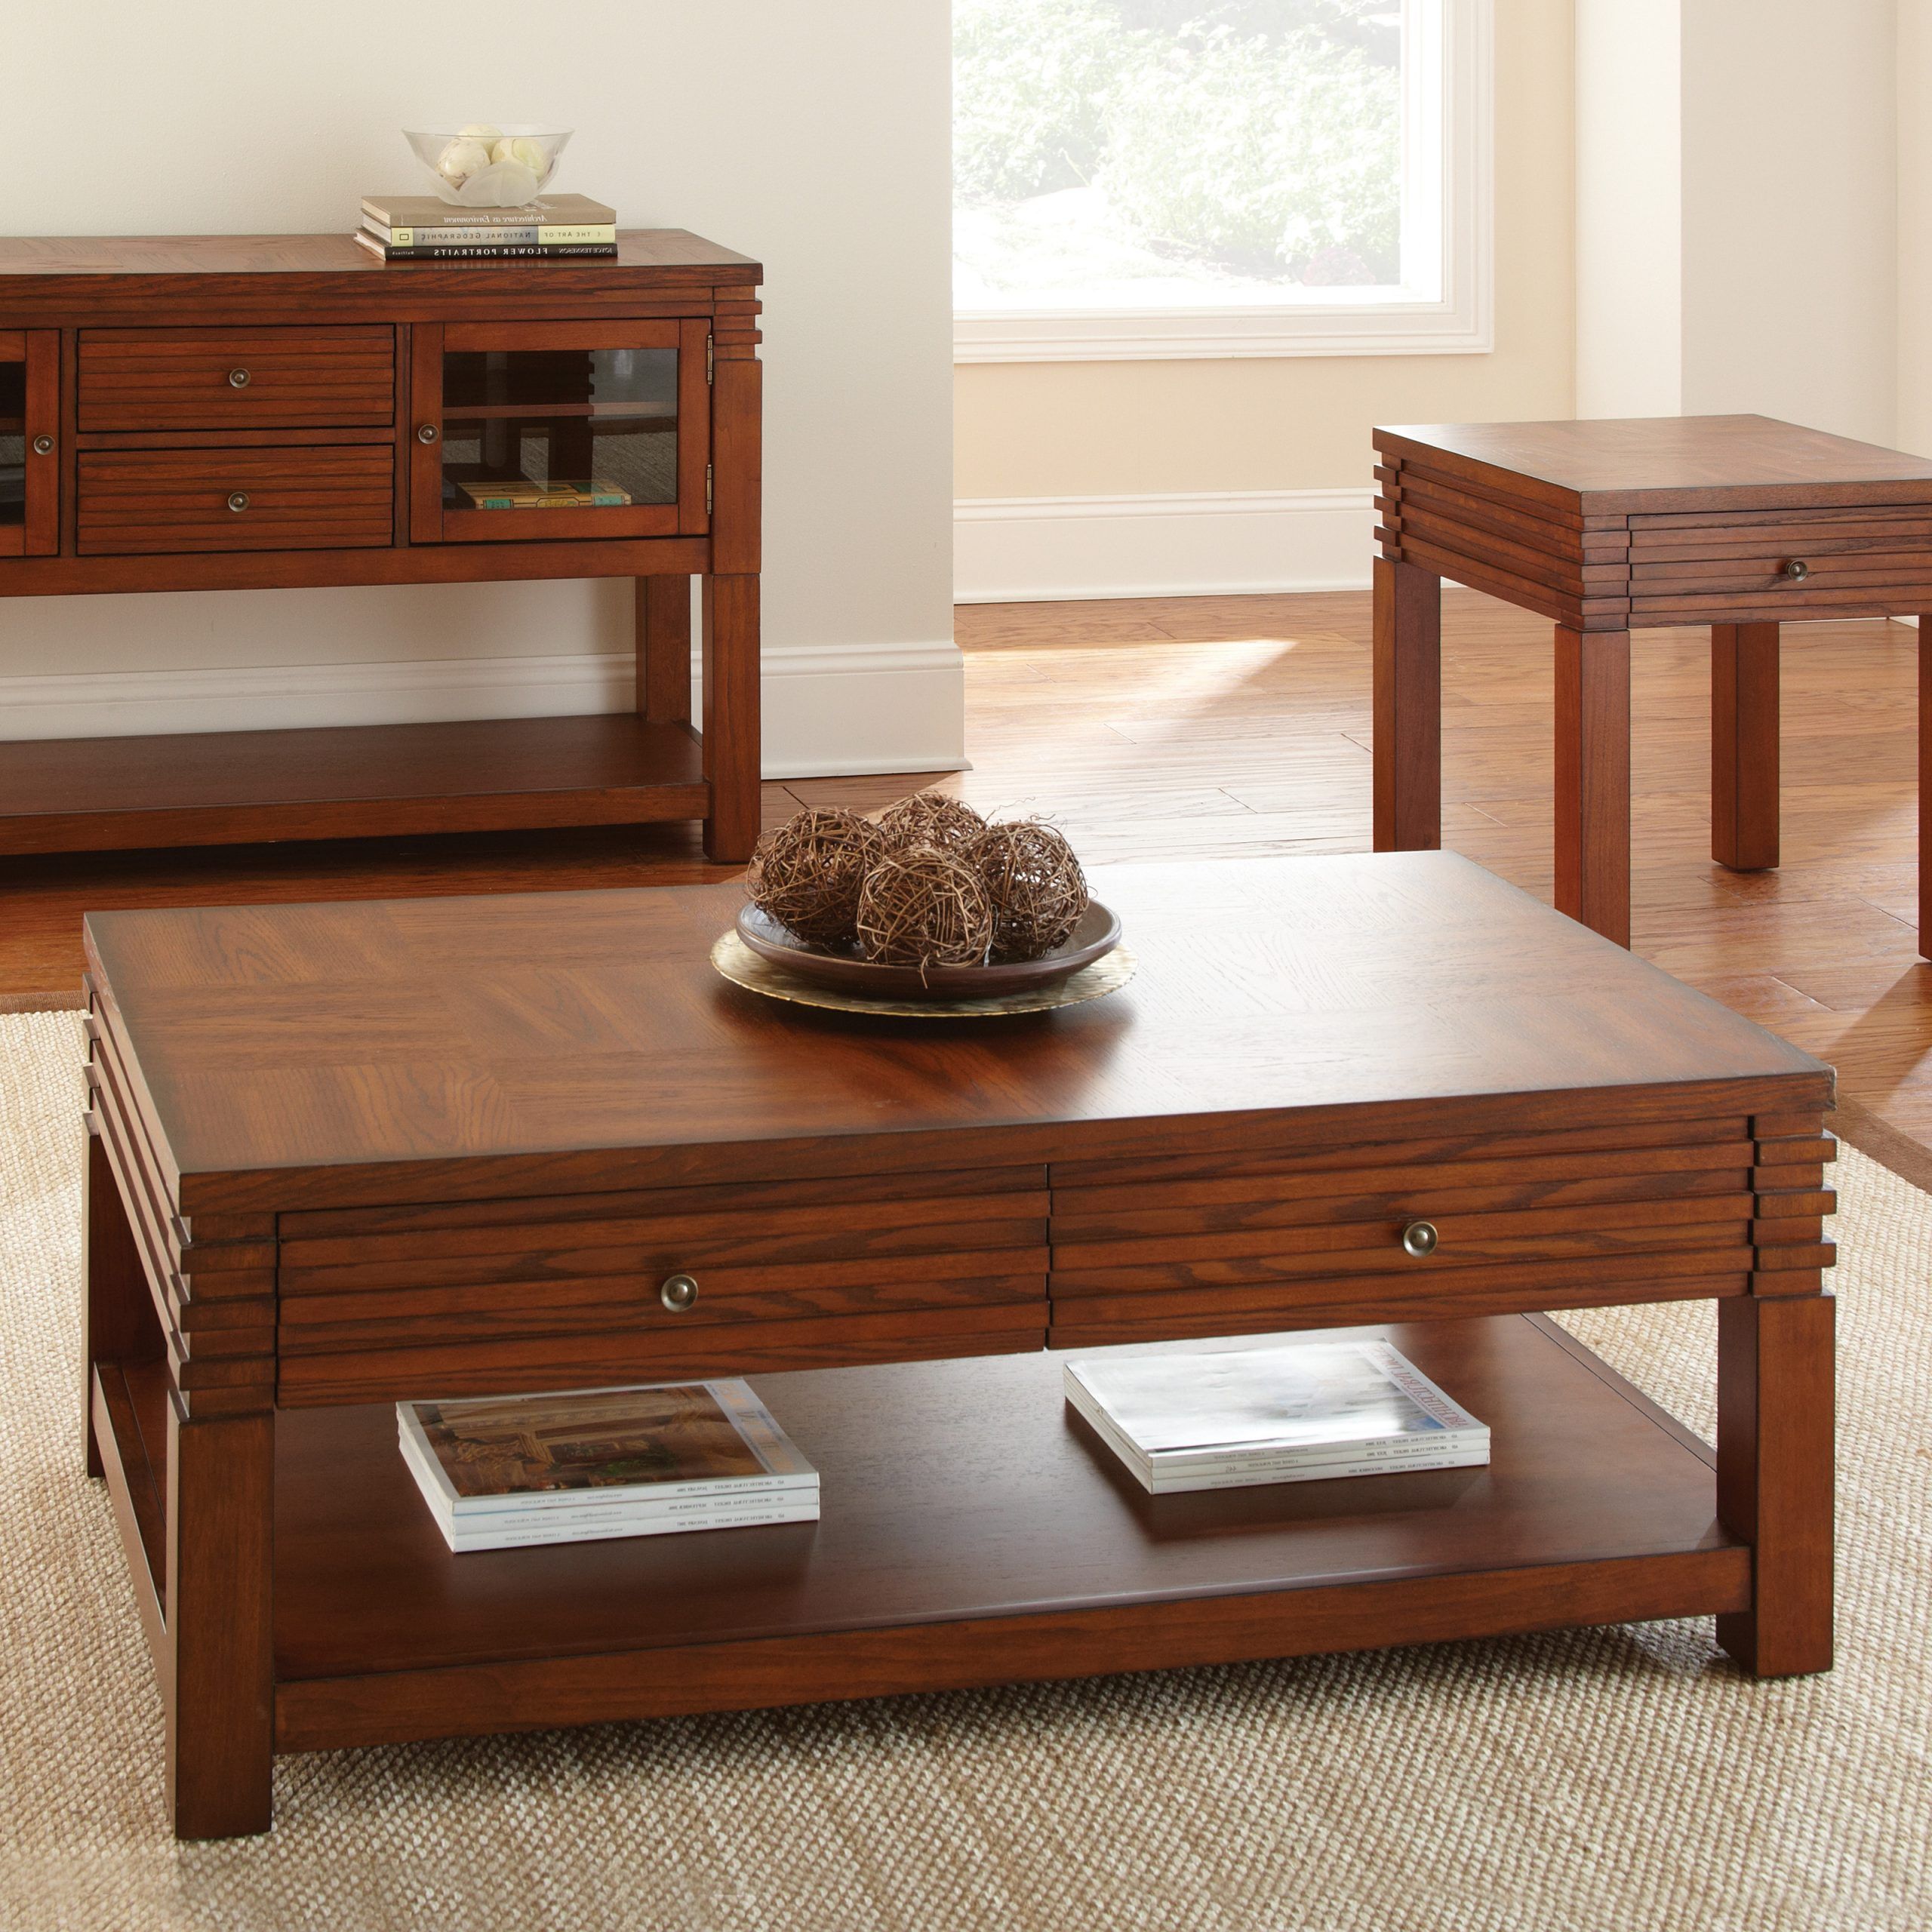 Wood Rectangular Coffee Tables Regarding Famous Steve Silver Lambert Rectangle Cherry Wood Coffee Table At (View 1 of 20)